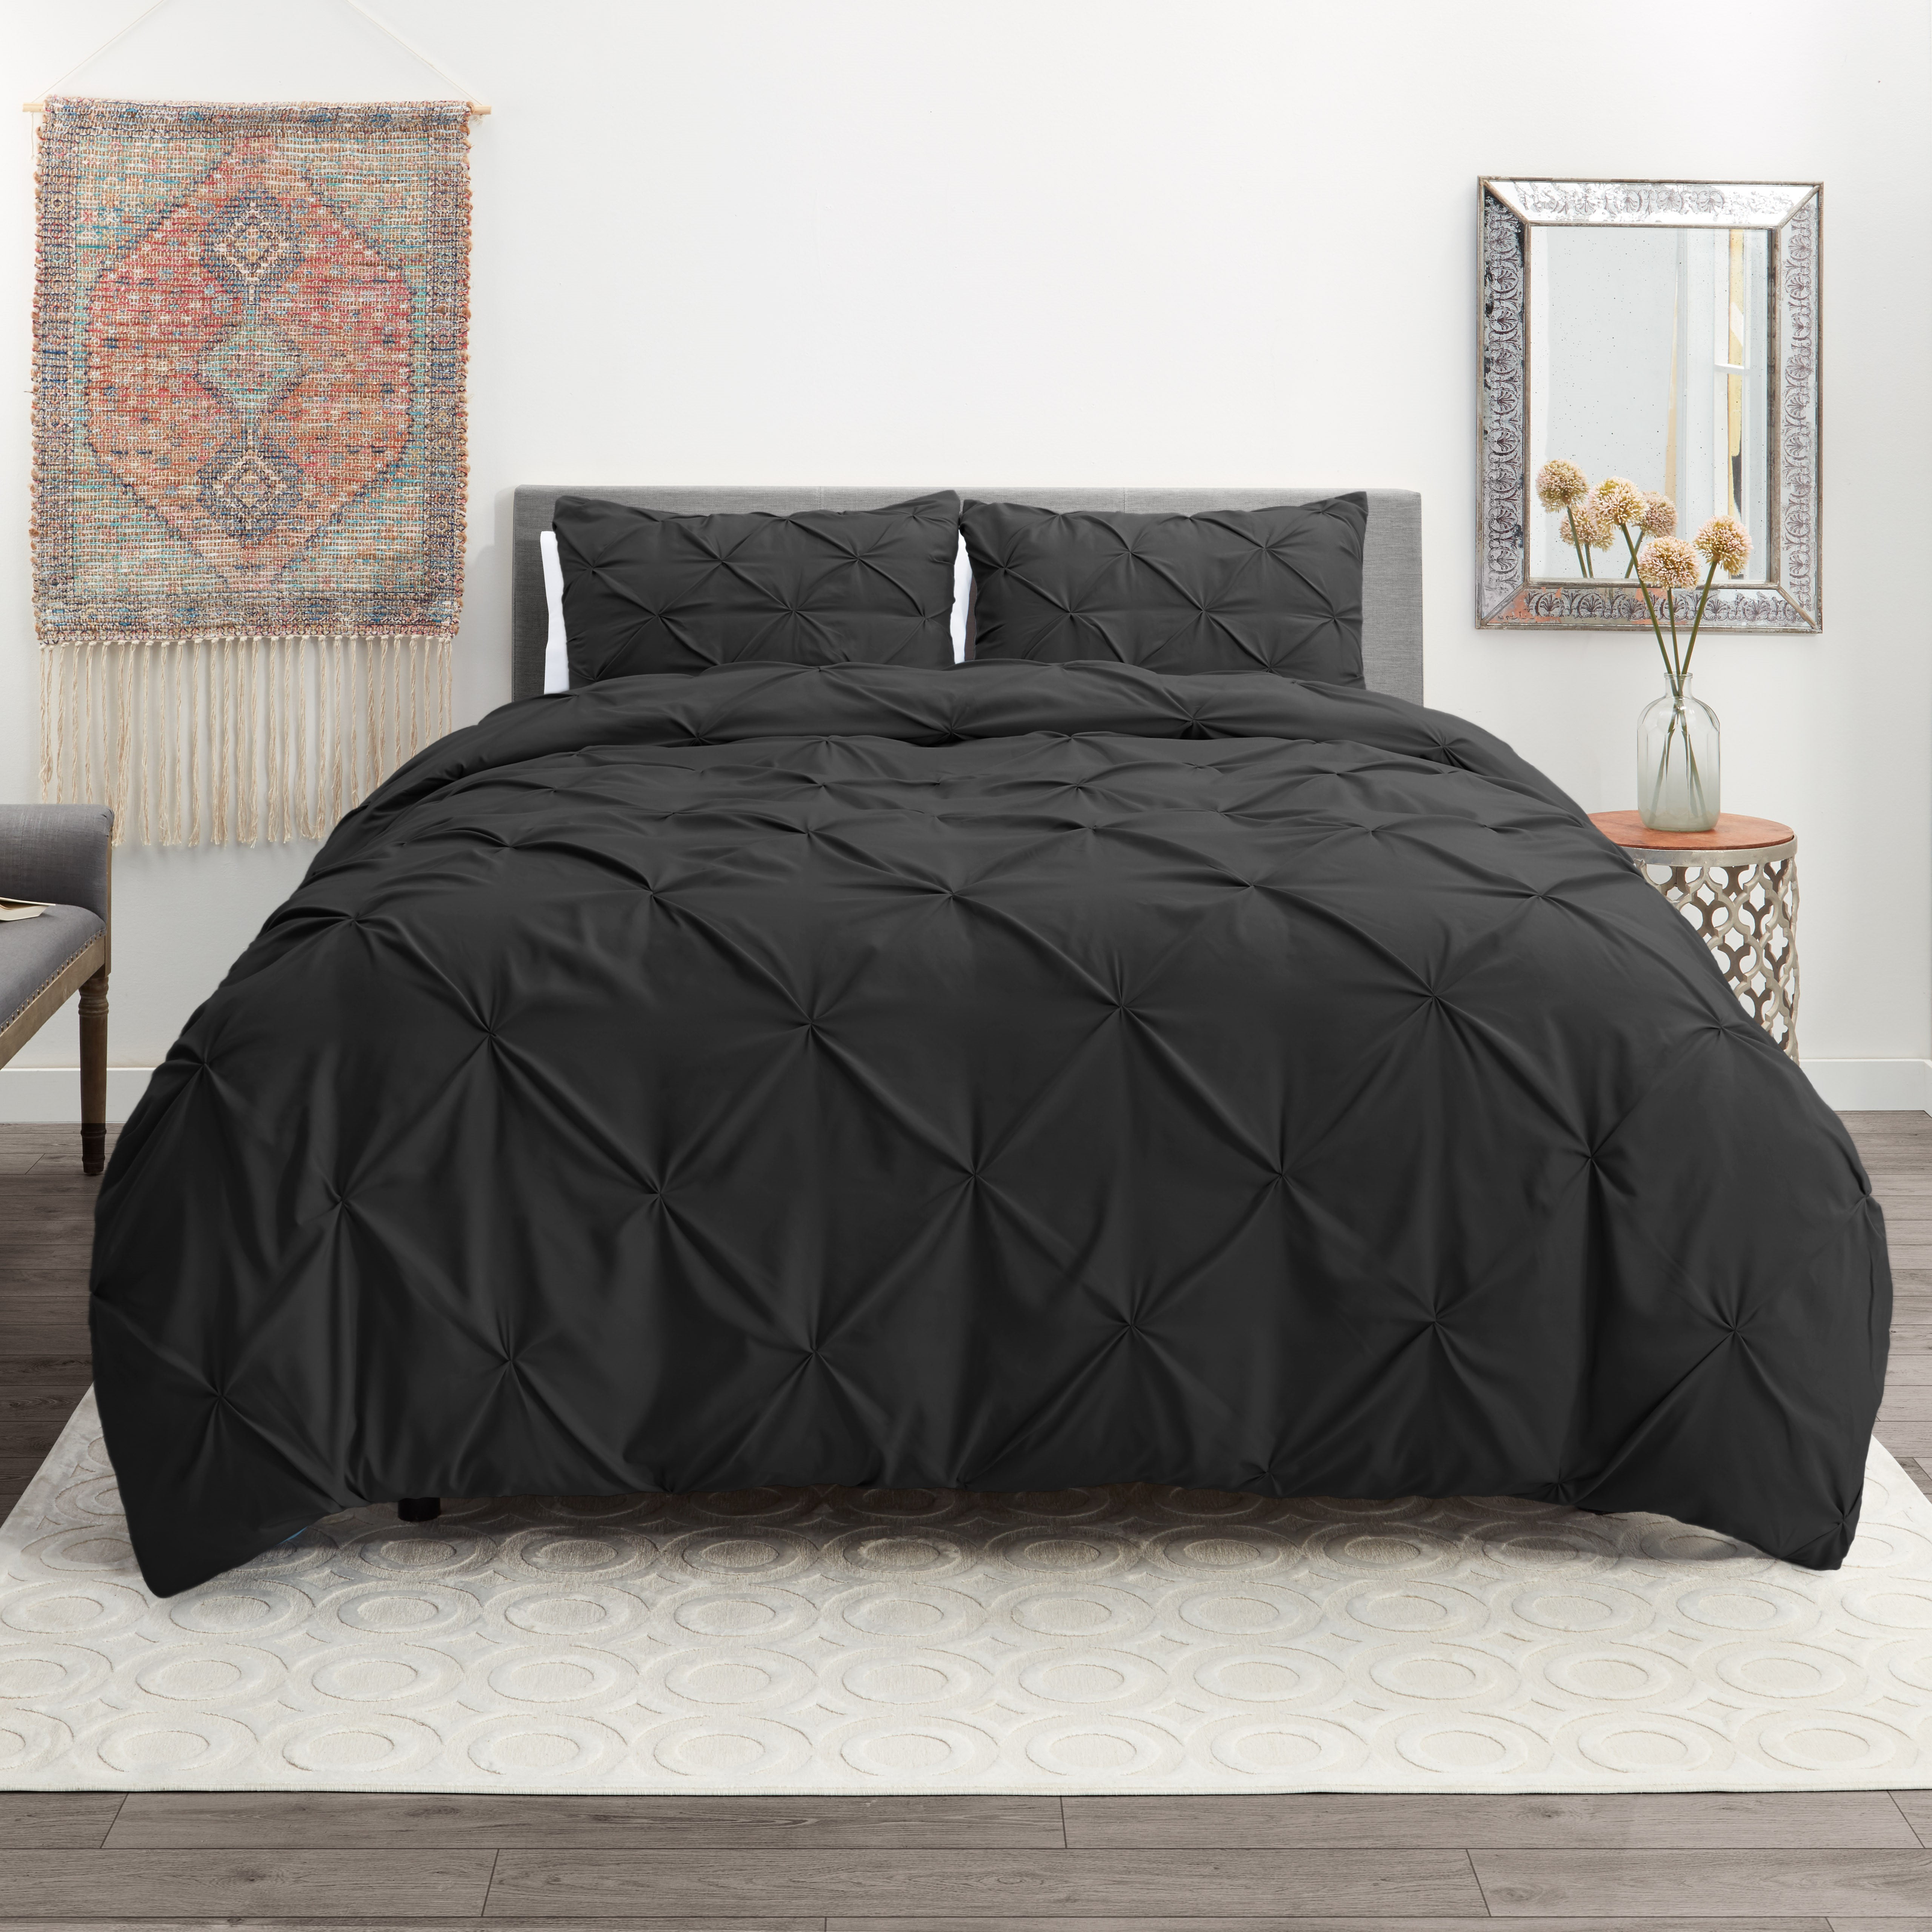 3 Piece Pinch Pleated Duvet Cover Set, King Duvet Cover With Corner Ties